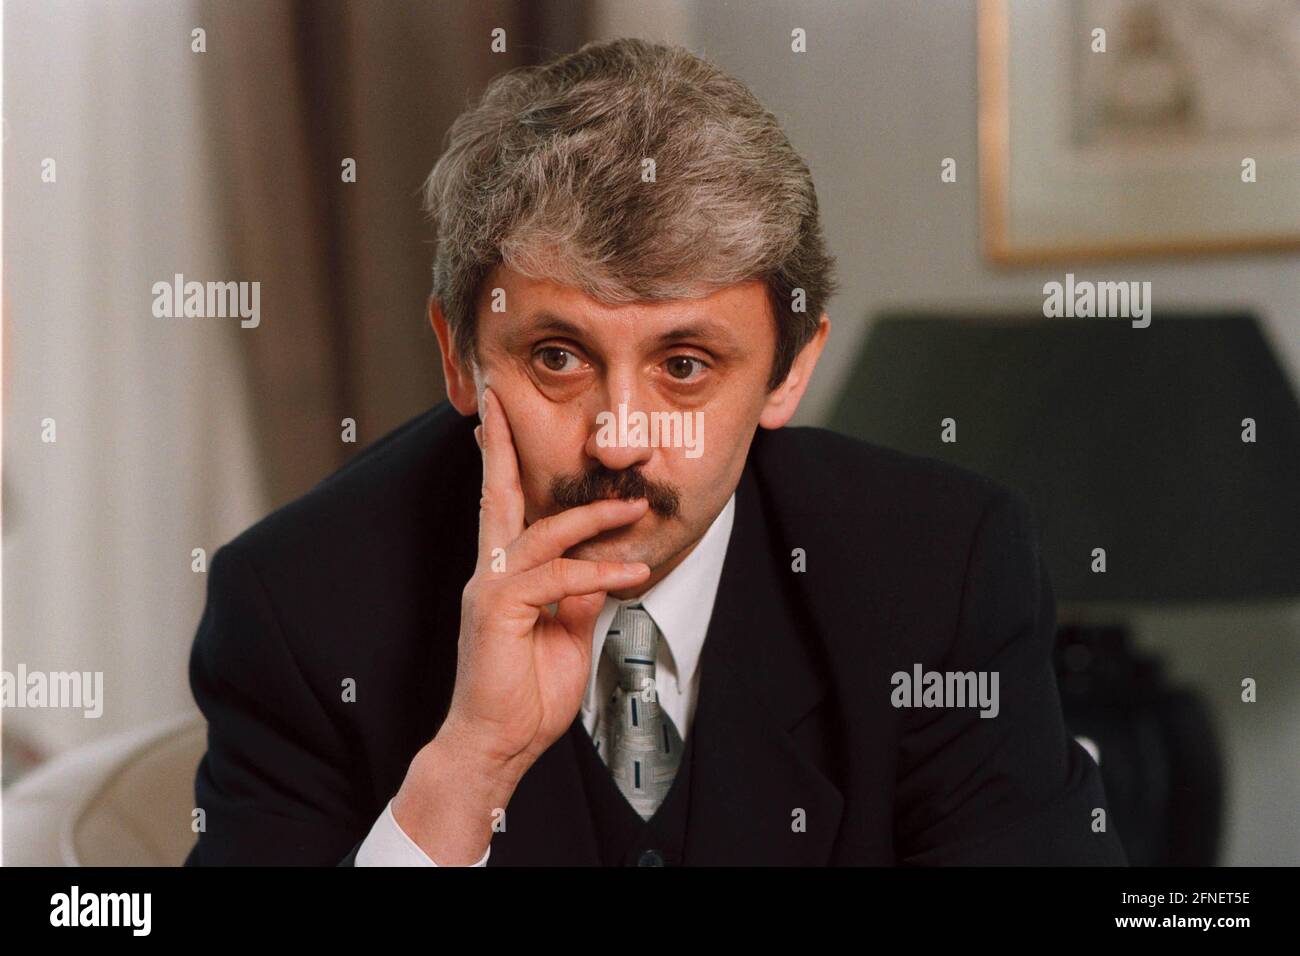 Mikulás Dzurinda, Prime Minister of the Slovak Republic, during an interview at the Federal Government Guest House. [automated translation] Stock Photo